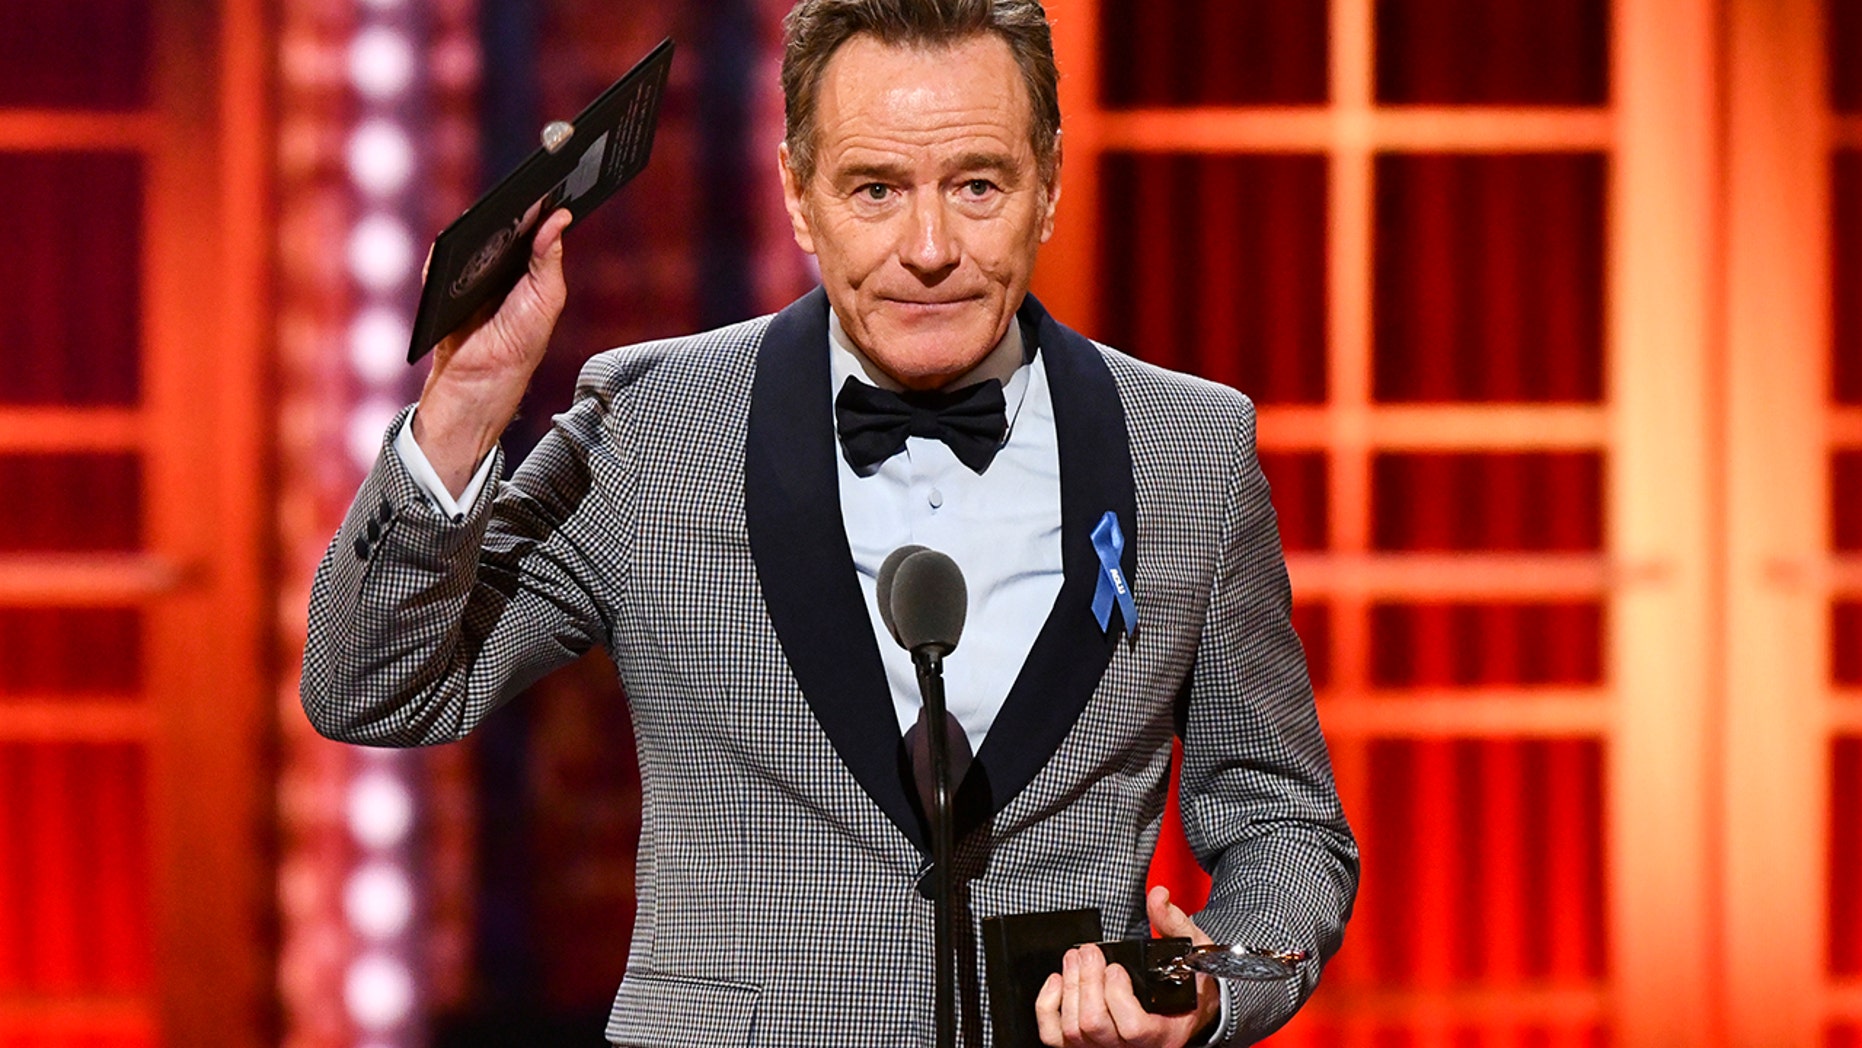 Bryan Cranston accepts the award for best performance by an actor in a leading role in a play for "Network" at the 73rd annual Tony Awards at Radio City Music Hall on Sunday, June 9, 2019, in New York. (Photo by Charles Sykes/Invision/AP)